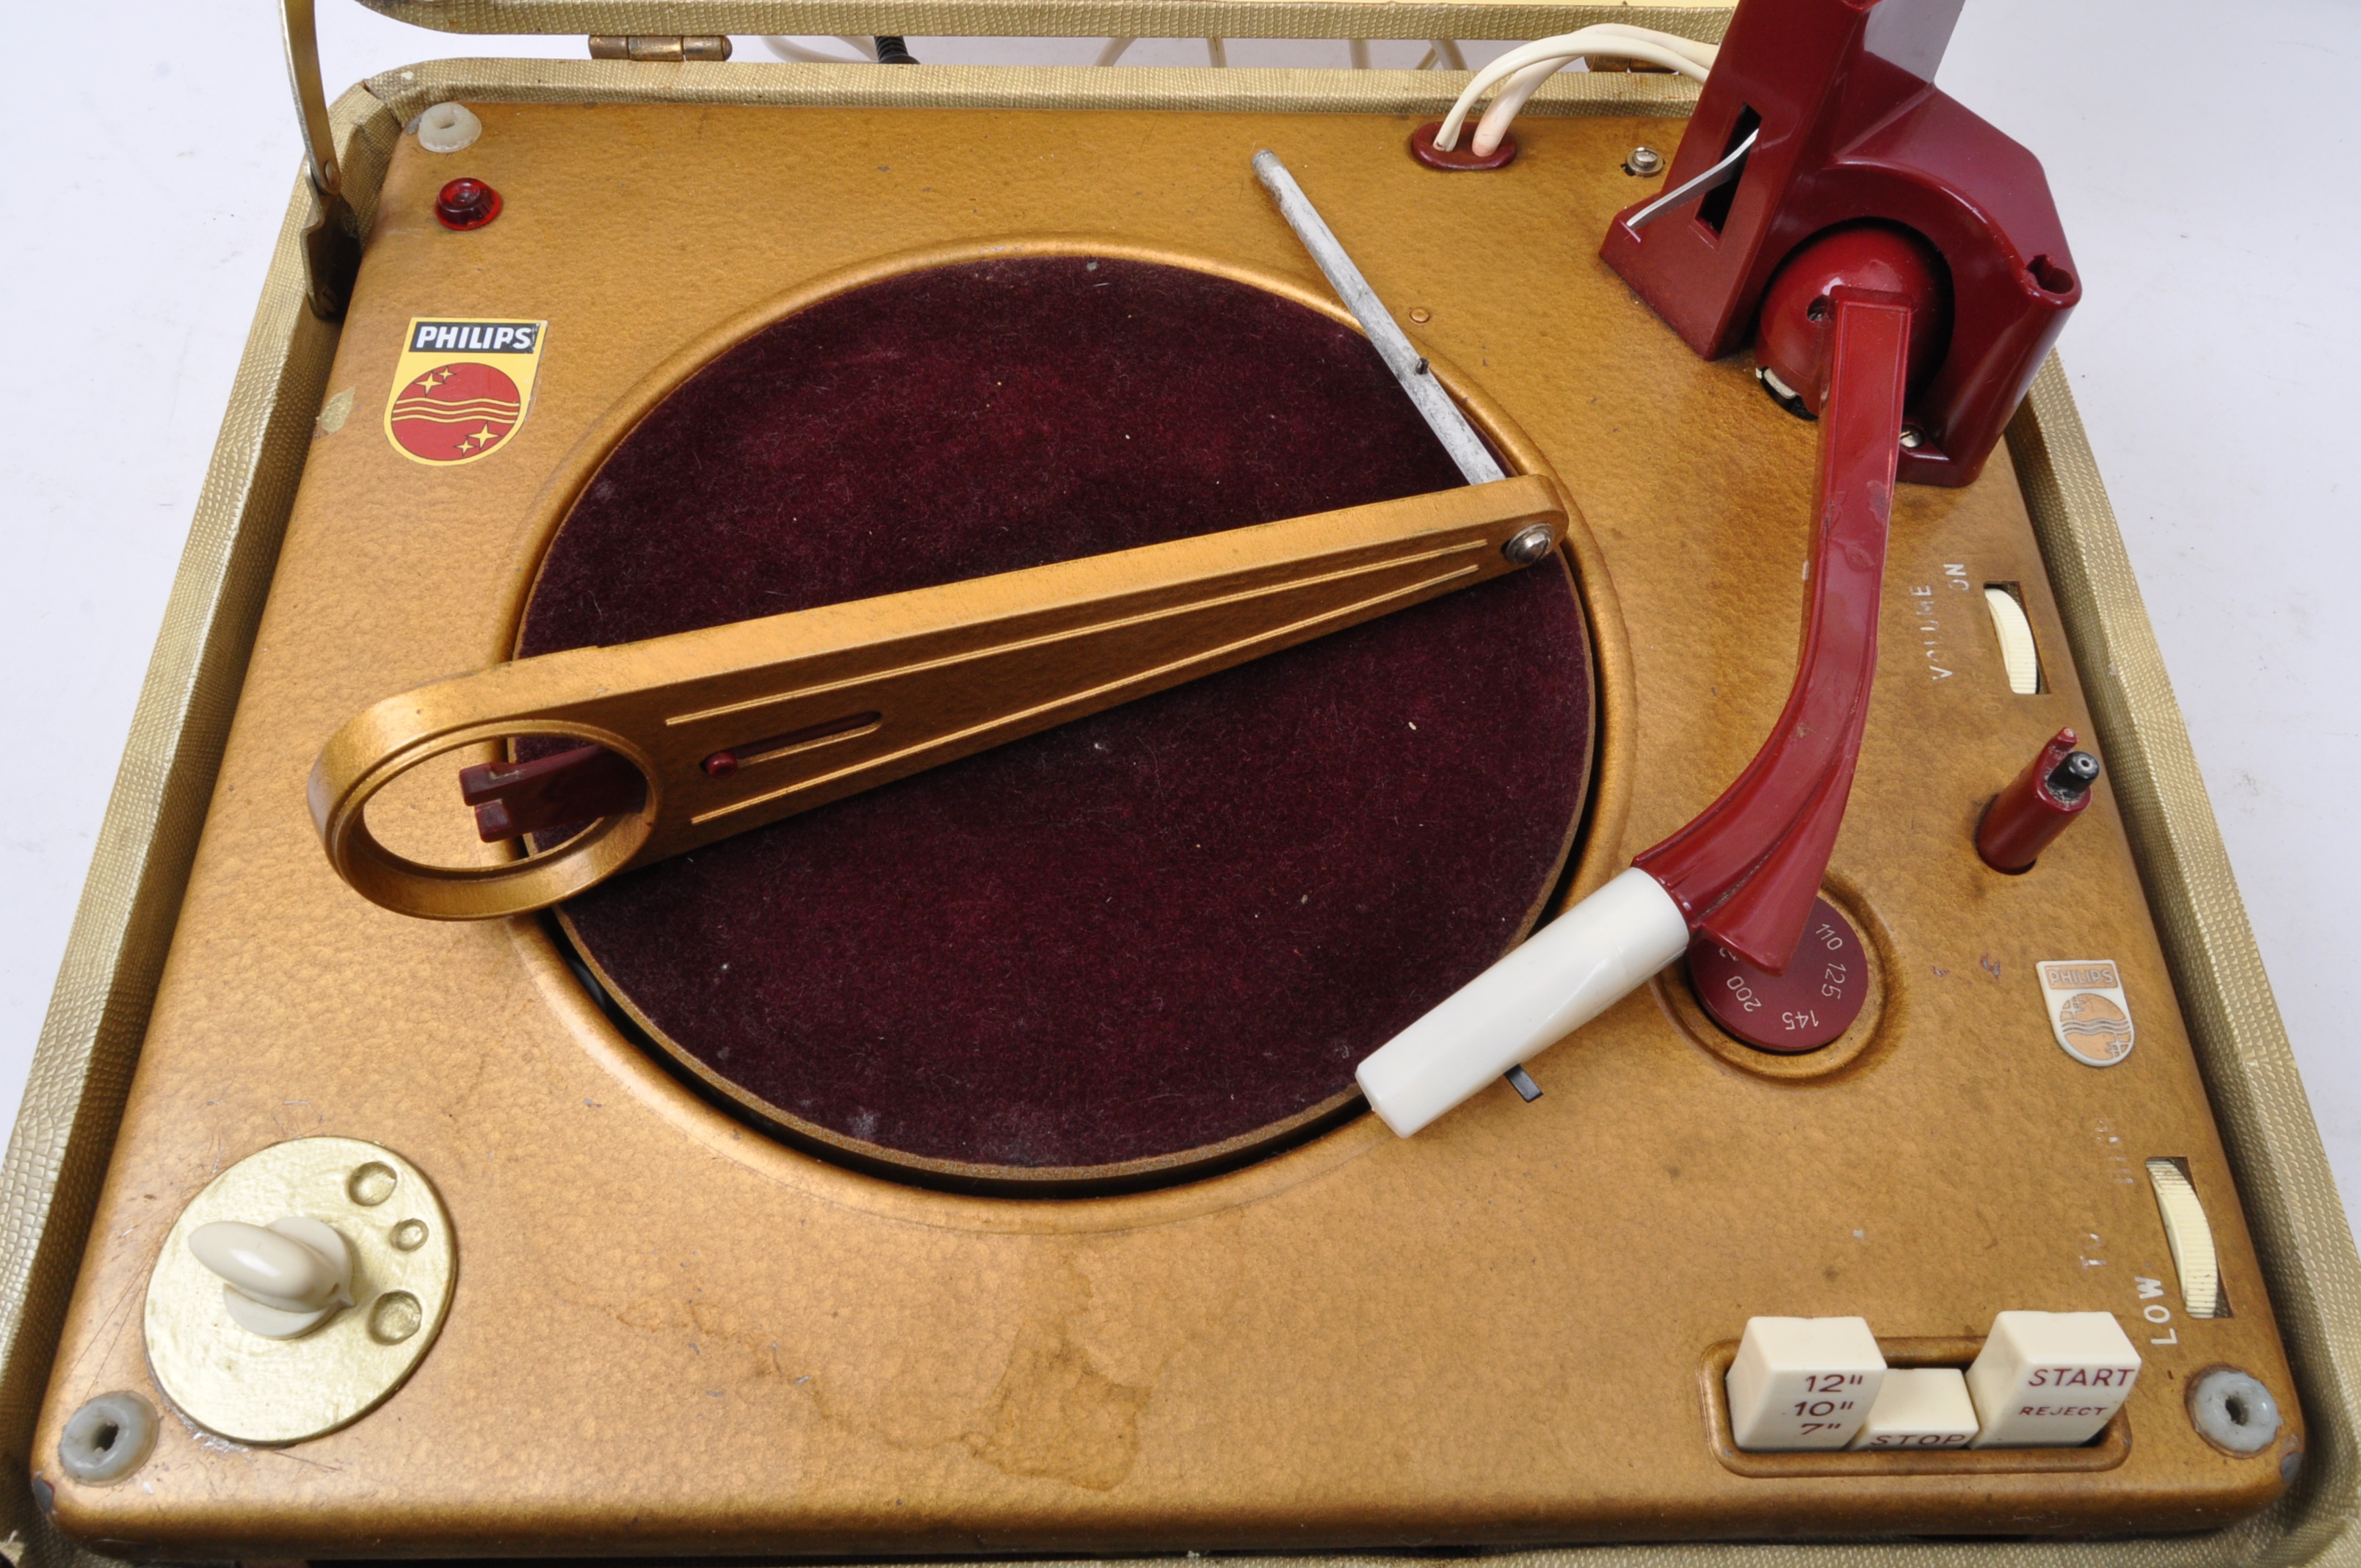 TWO RETRO VINTAGE PHILIPS 'DISC JOCKEY' RECORD PLAYERS - Image 6 of 6